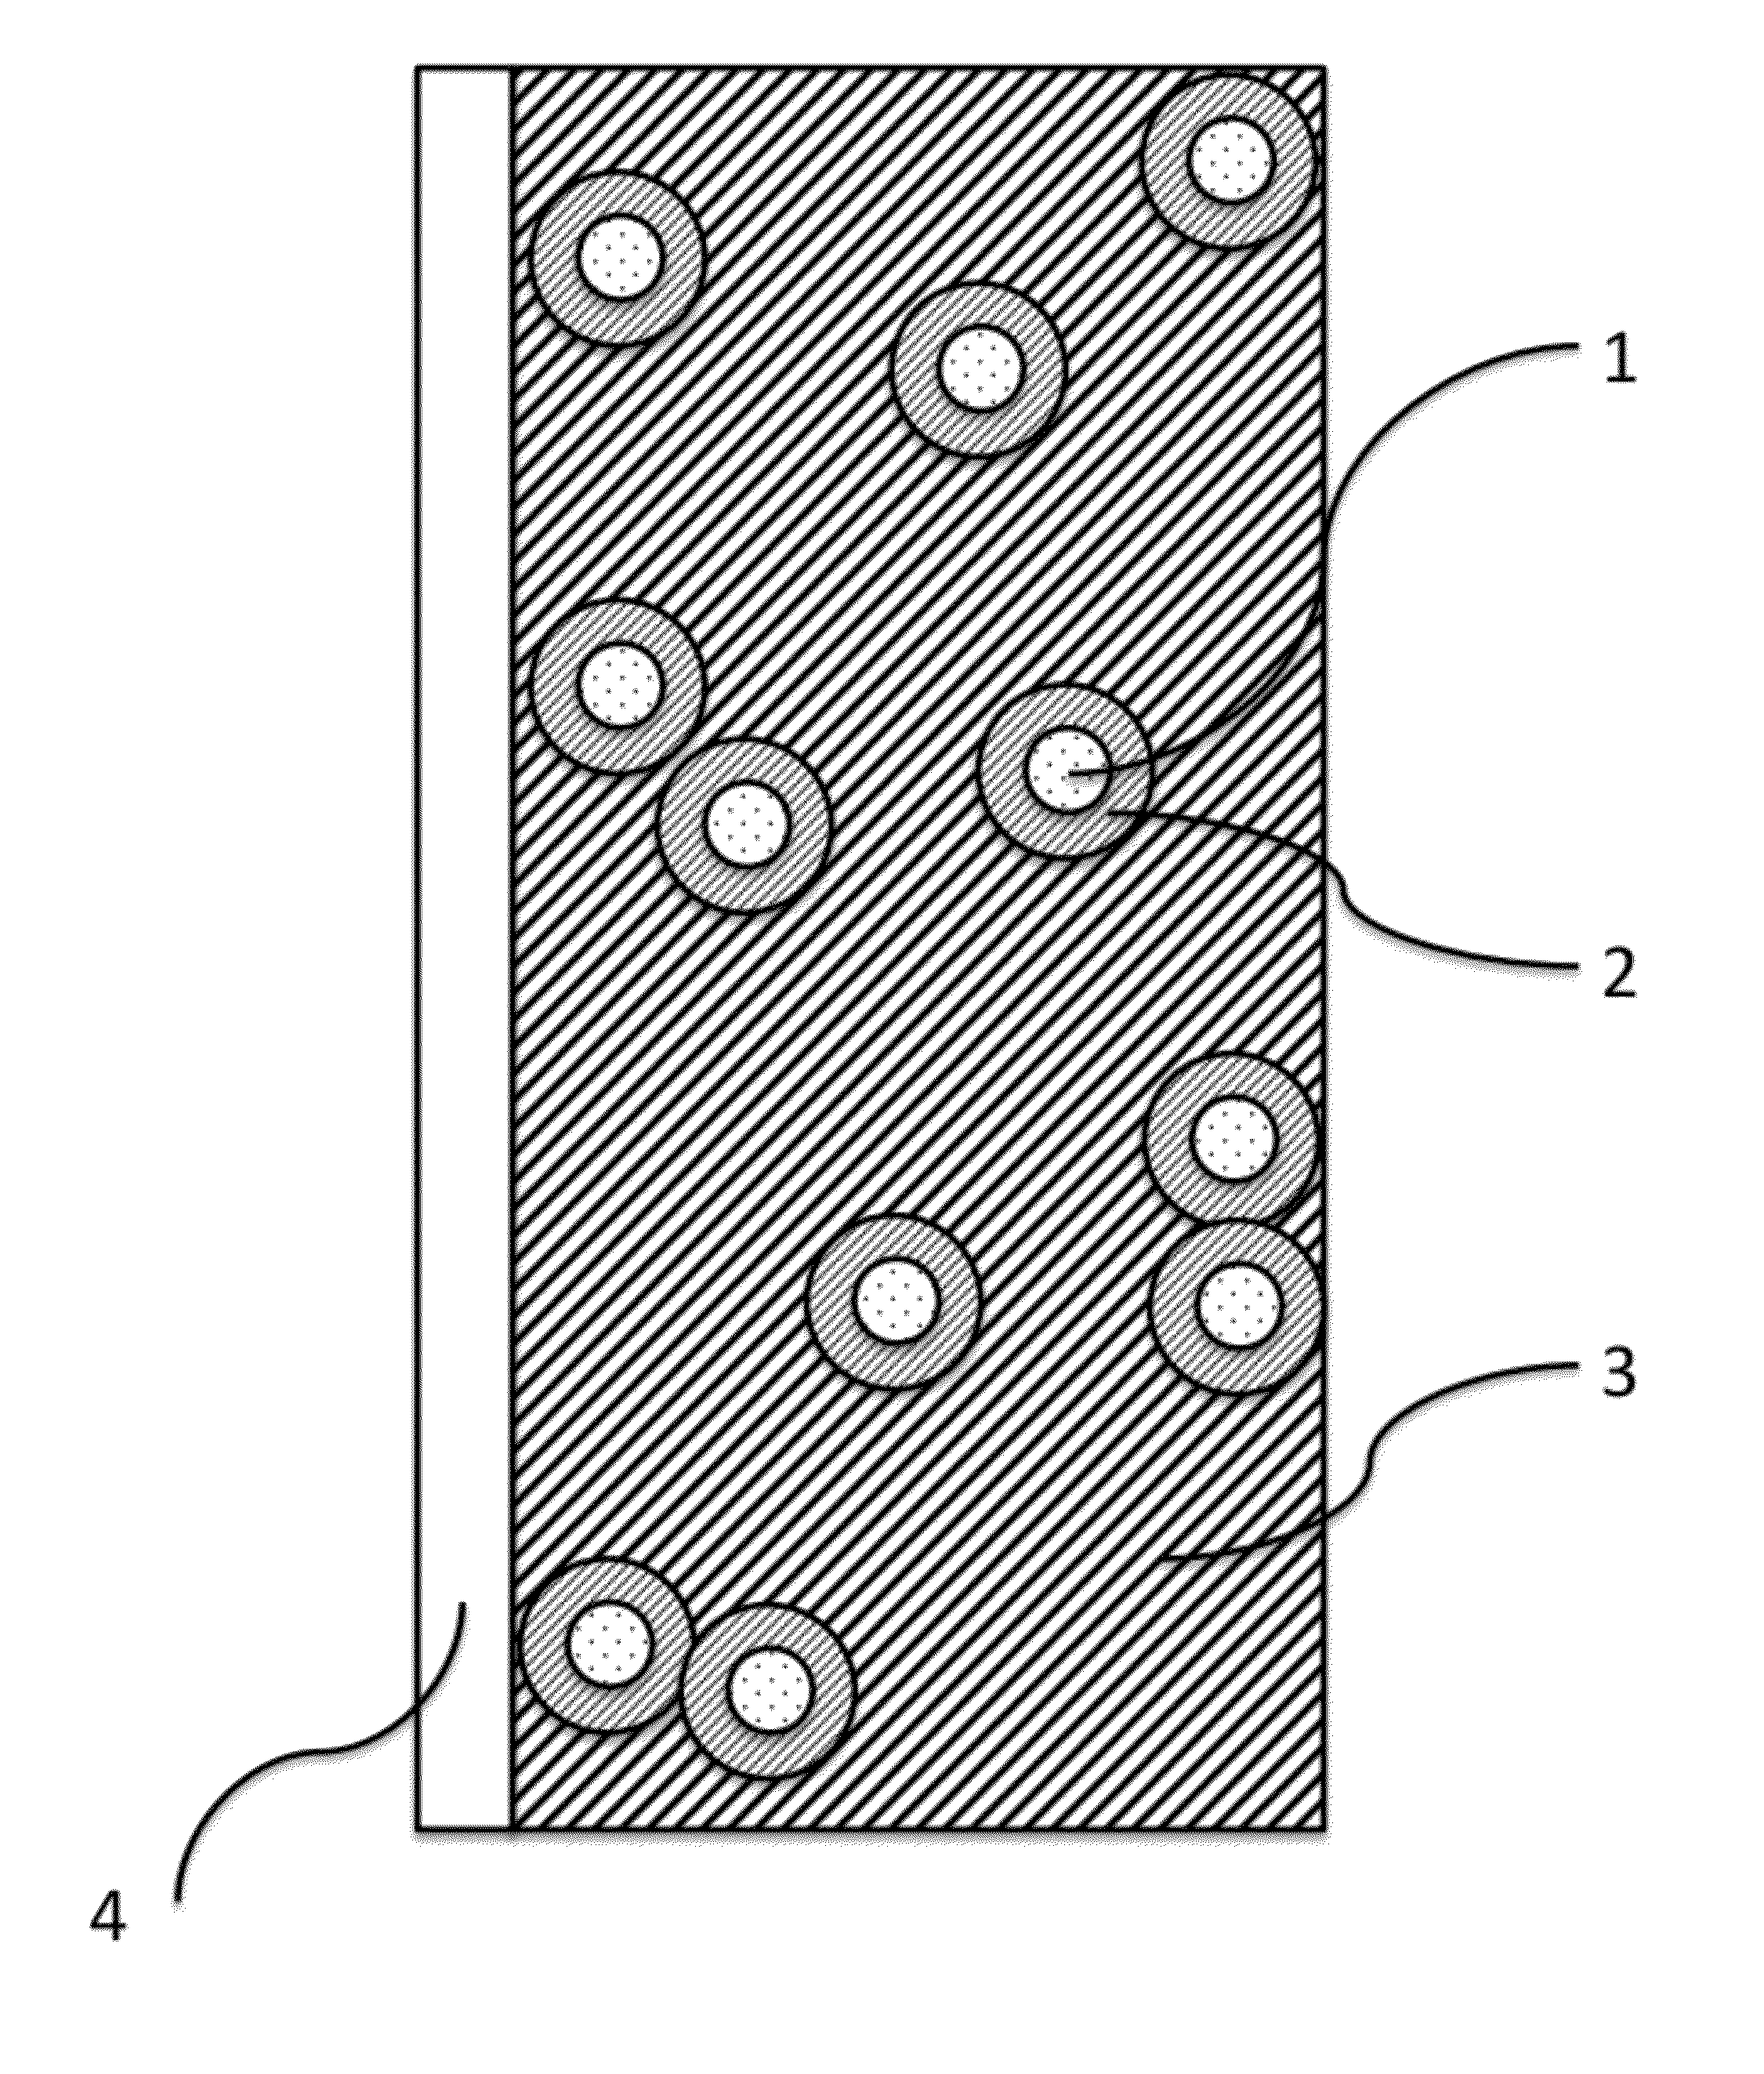 Surface-modified silicon anode active material, method of preparing the same, and anode and lithium battery employing the same